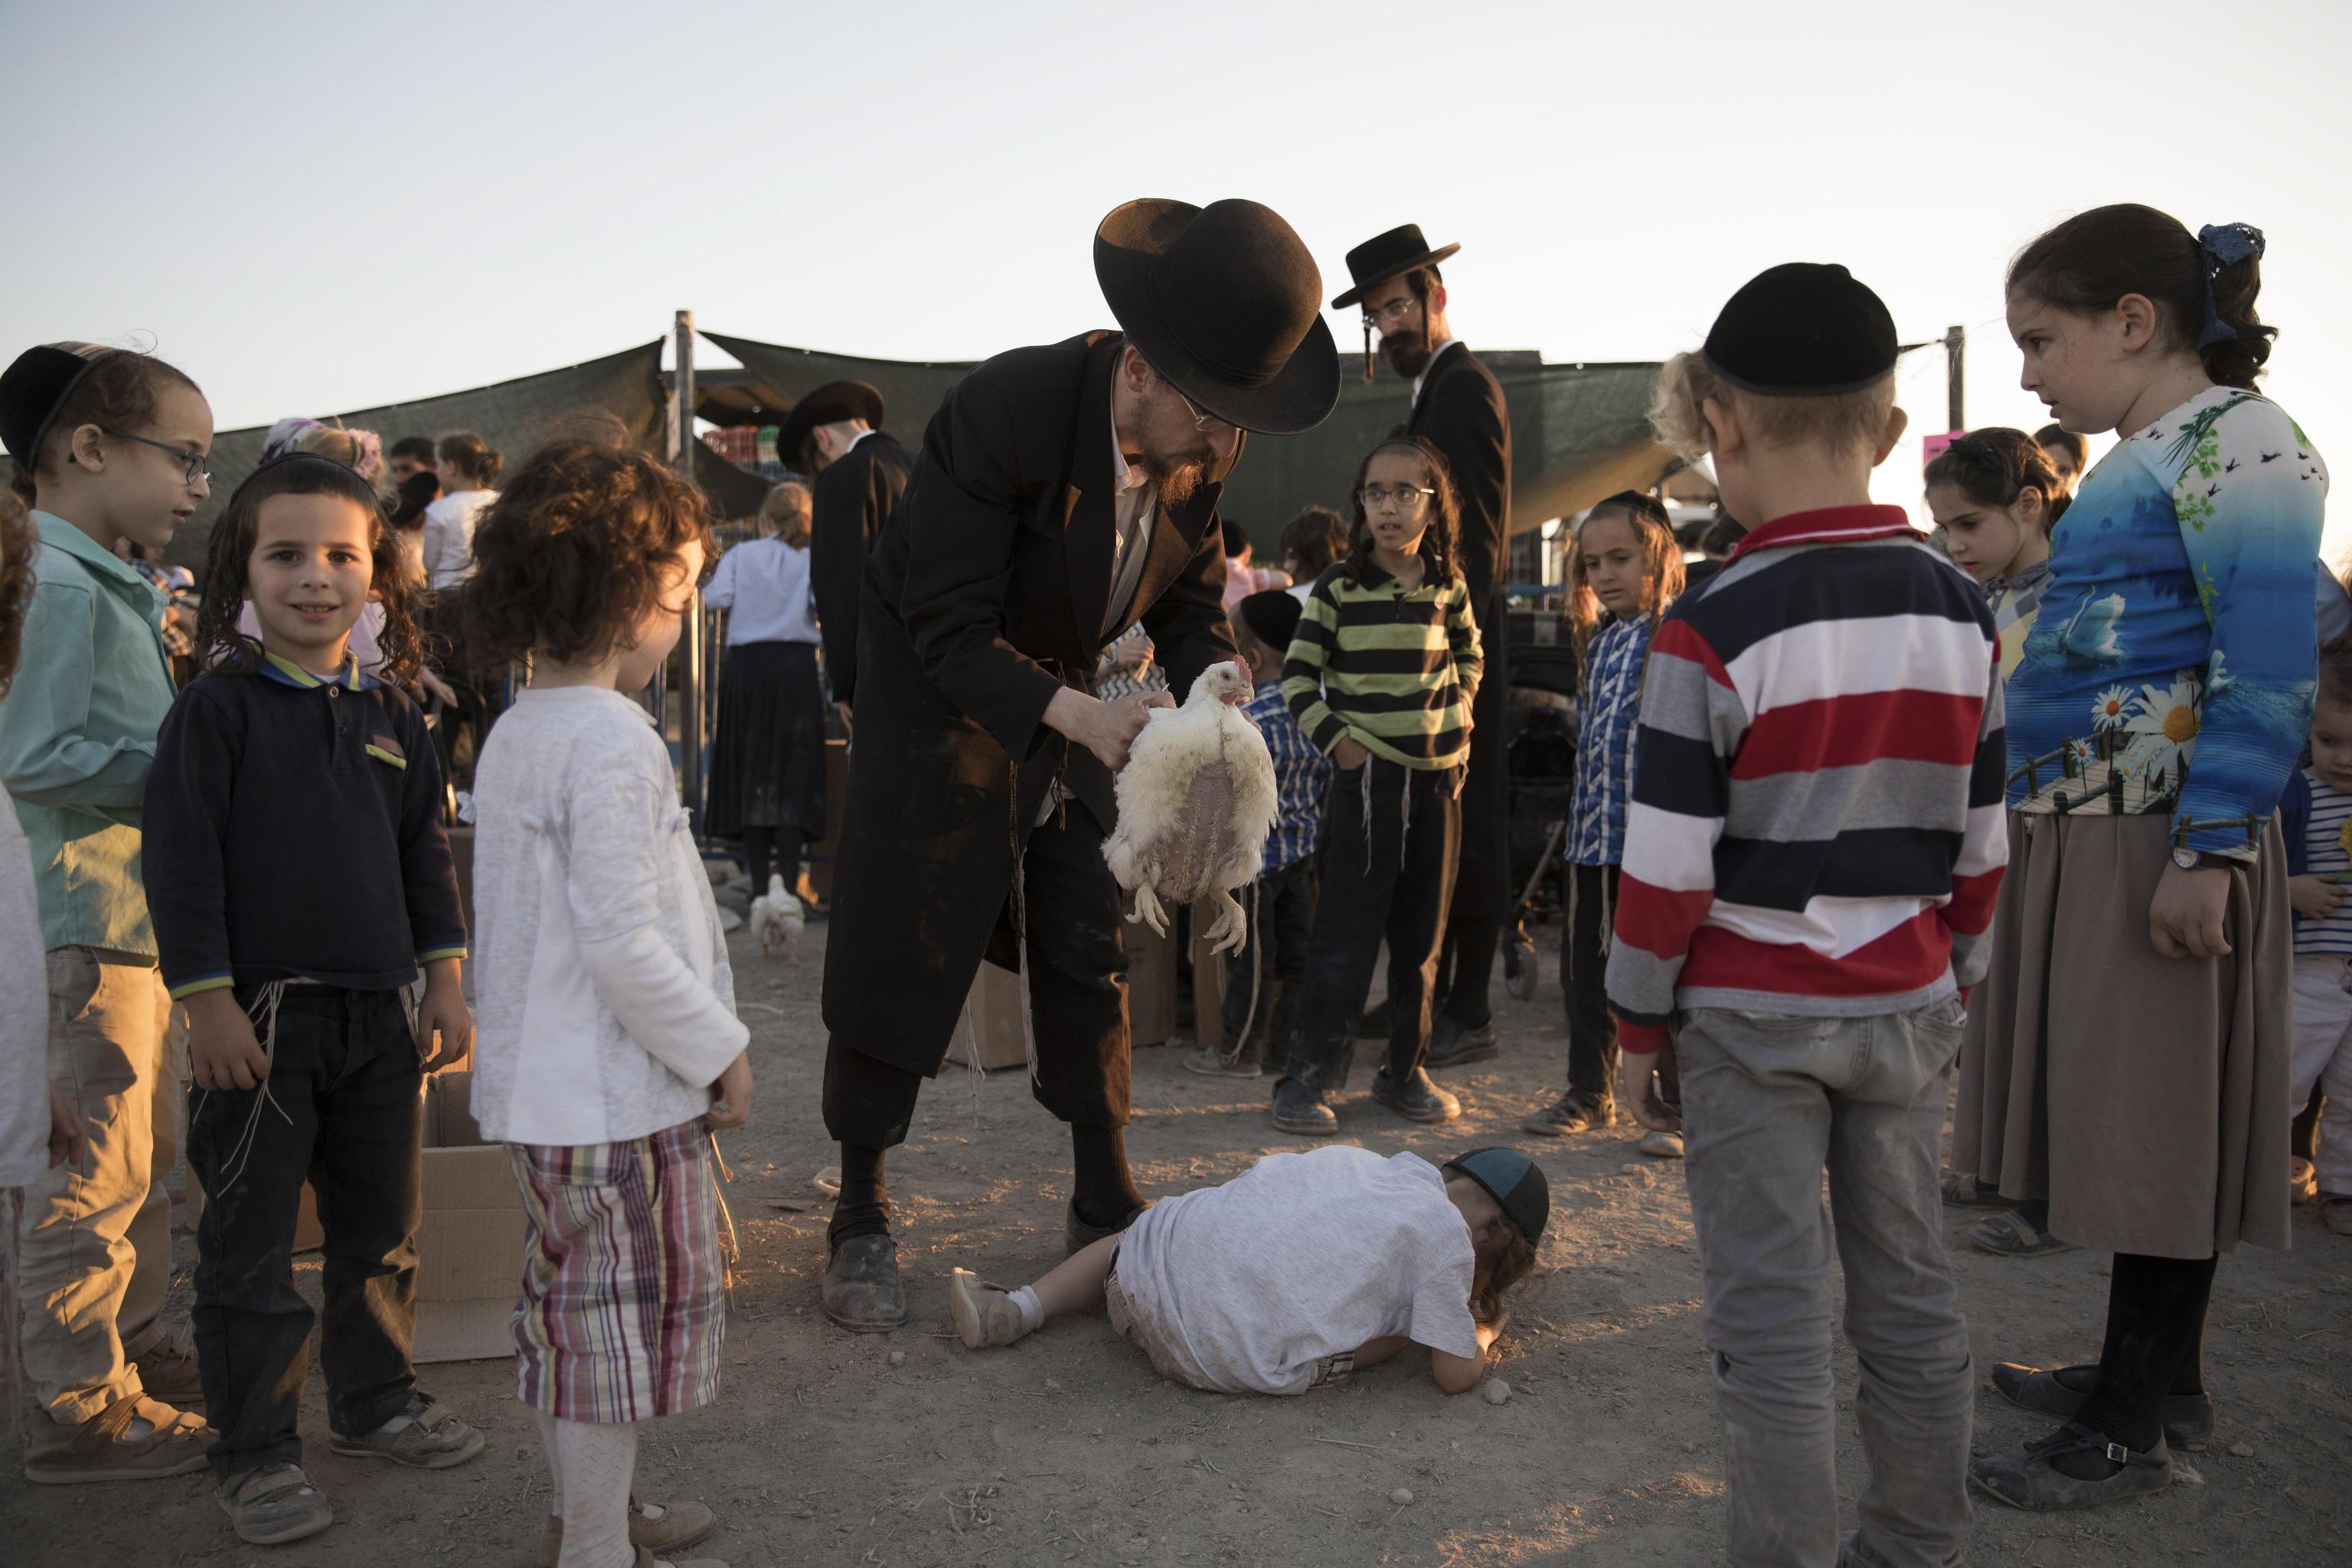 epa06233004 An ultra-Orthodox Jews performs a Jewish ritual called 'Kaparot,' performed before Yom Kippur, the Day of Atonement and the holiest of Jewish holidays, in Beit Shemesh, Israel, 28 September 2017. The Kaparot is a blessing and prayer recited as a live fowl, or chicken is passed over a person's head, symbolically transferring that person's sins accumulated over the past year into the bird, which is butchered and eaten or donated to charity. Yom Kippur begins at sundown on 29 September when the entire country comes to a standstill as people fast and spend much of the day in prayer.  EPA/ABIR SULTAN